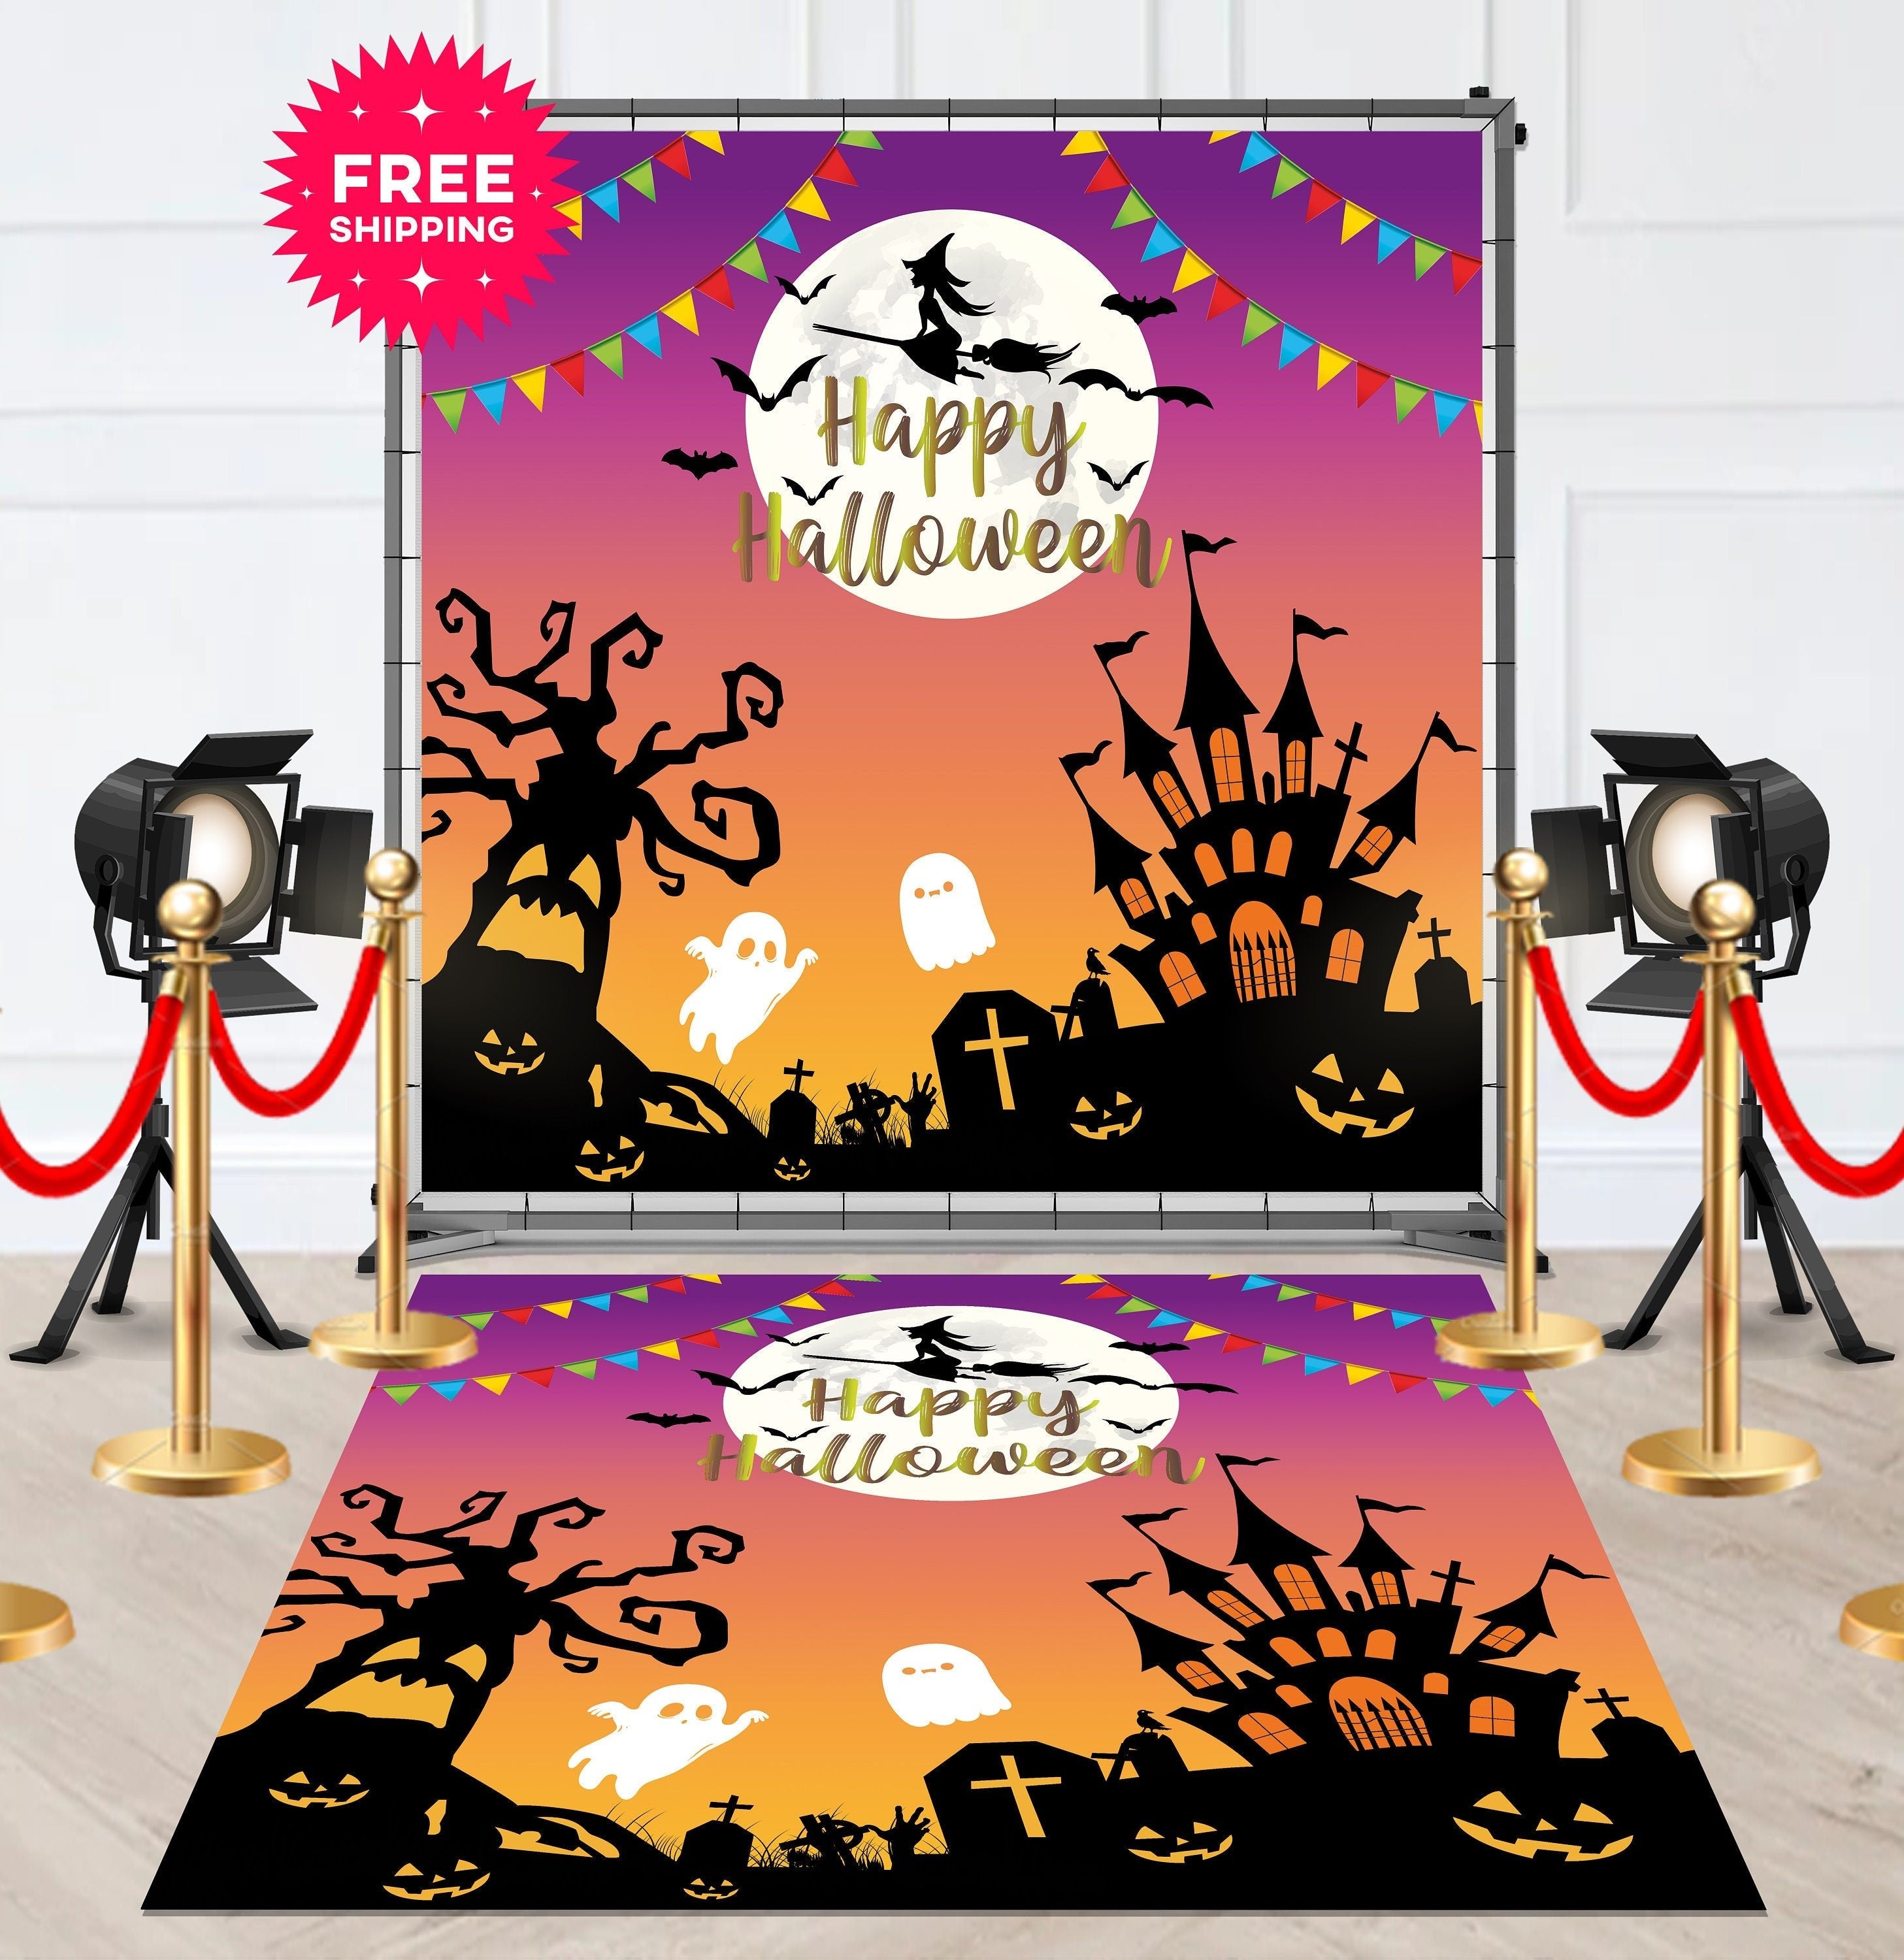 Halloween Party Removable Floor Decal Runner - Hue Design Group